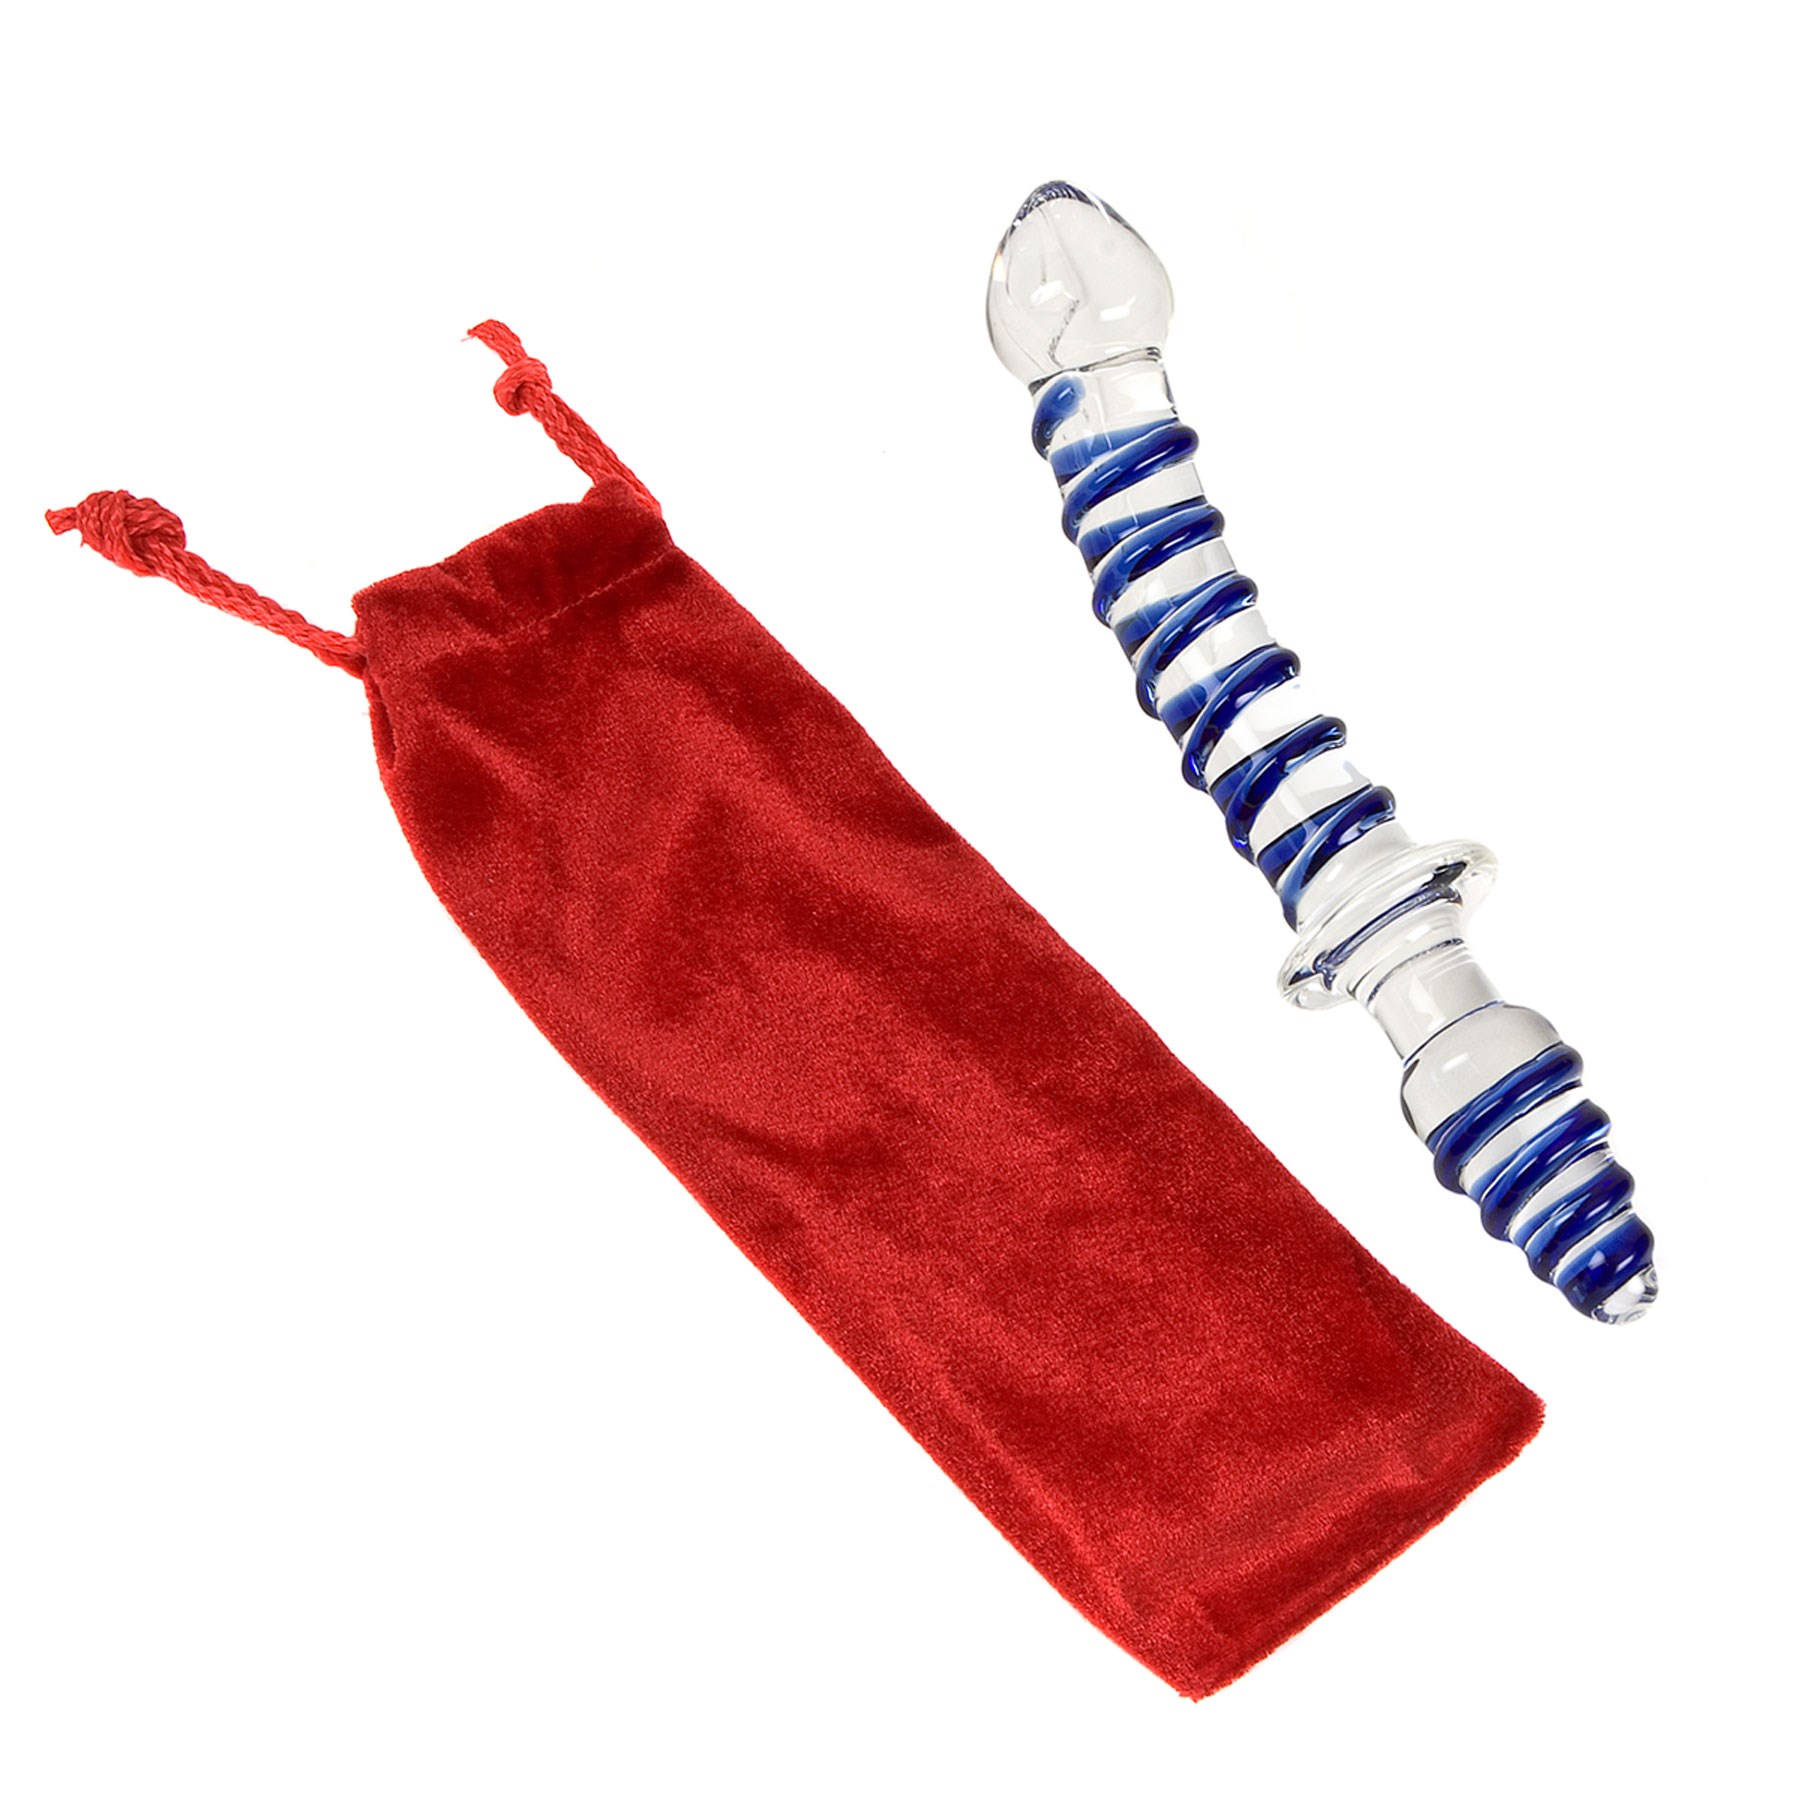 Twisted Love Glass Dildo with red storage bag